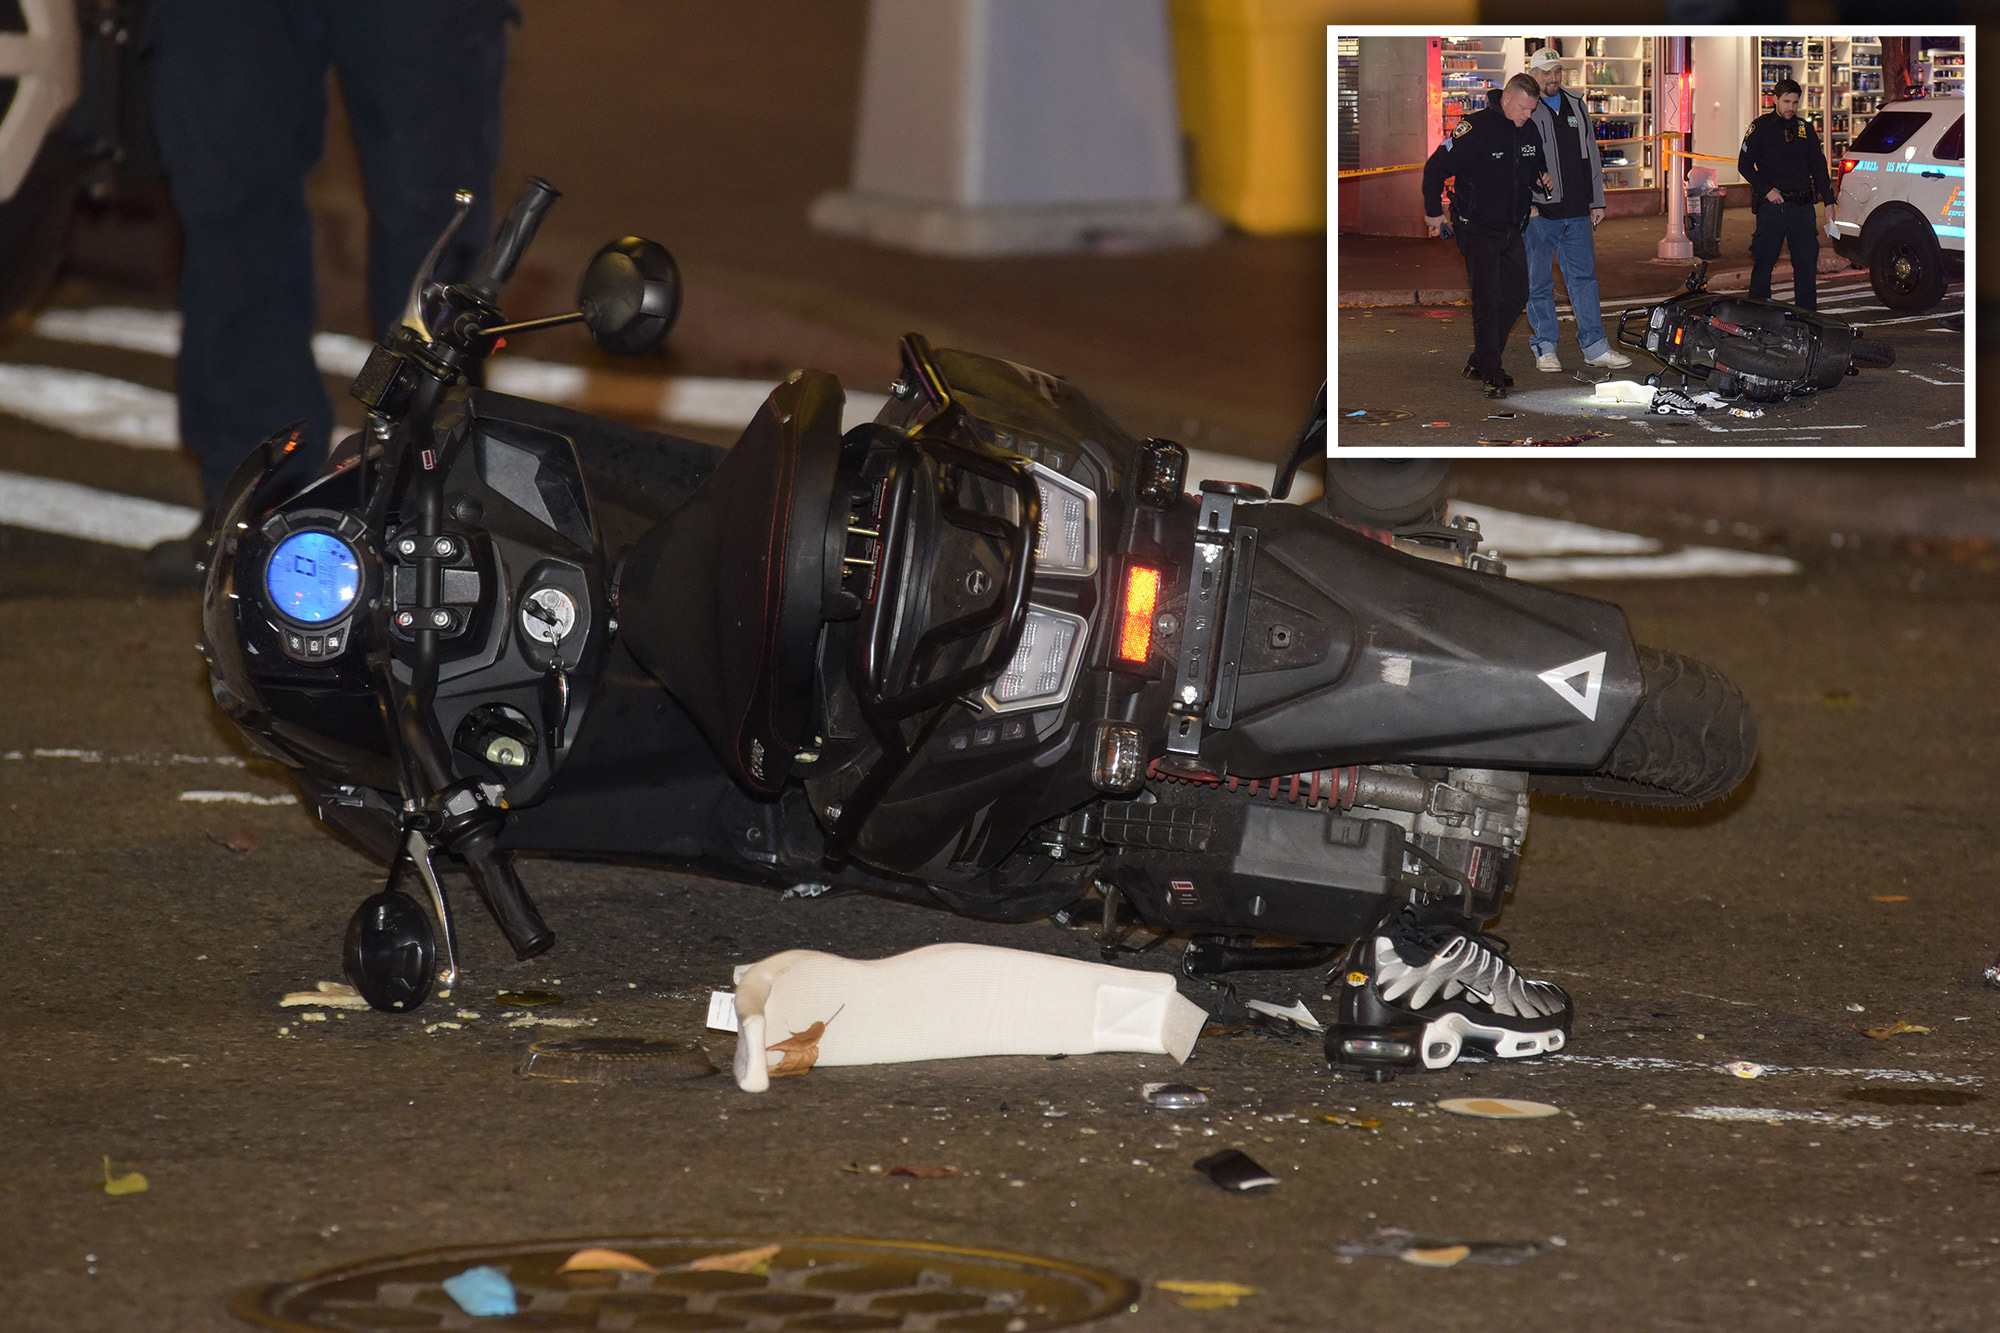 Driver arrested after fatal crash with motor scooter in Jackson Heights